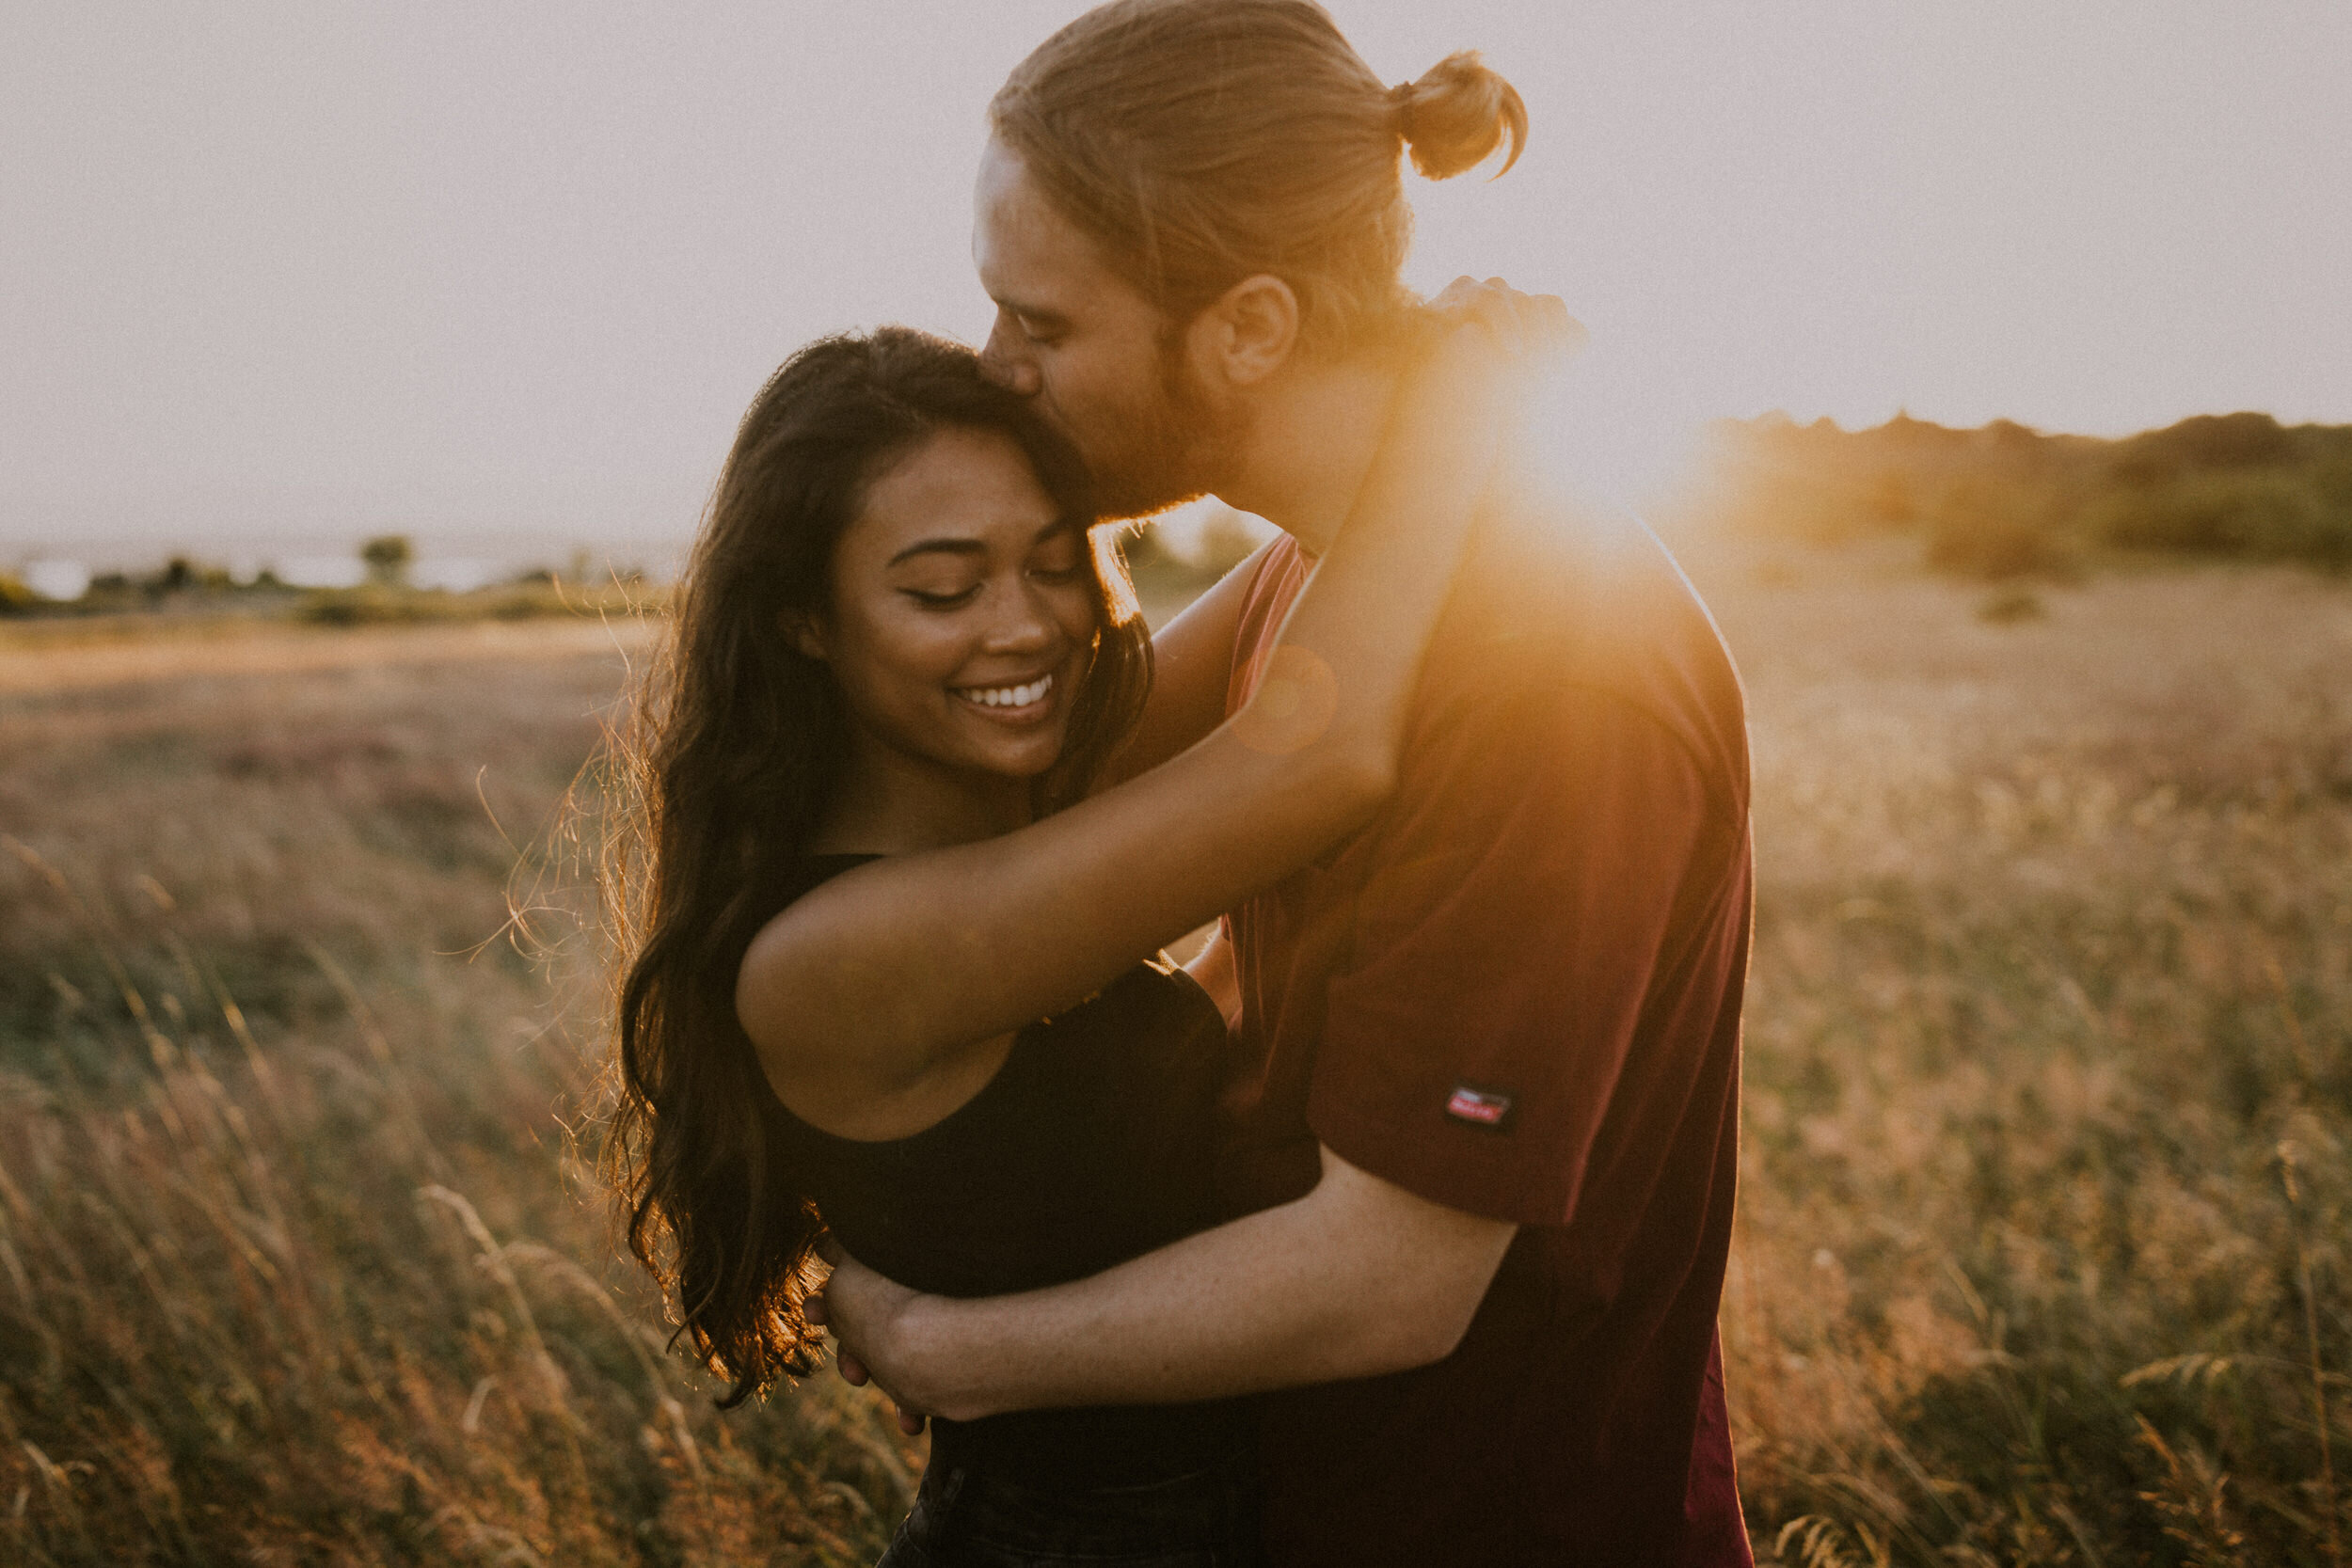  discovery park seattle sunset engagement session 